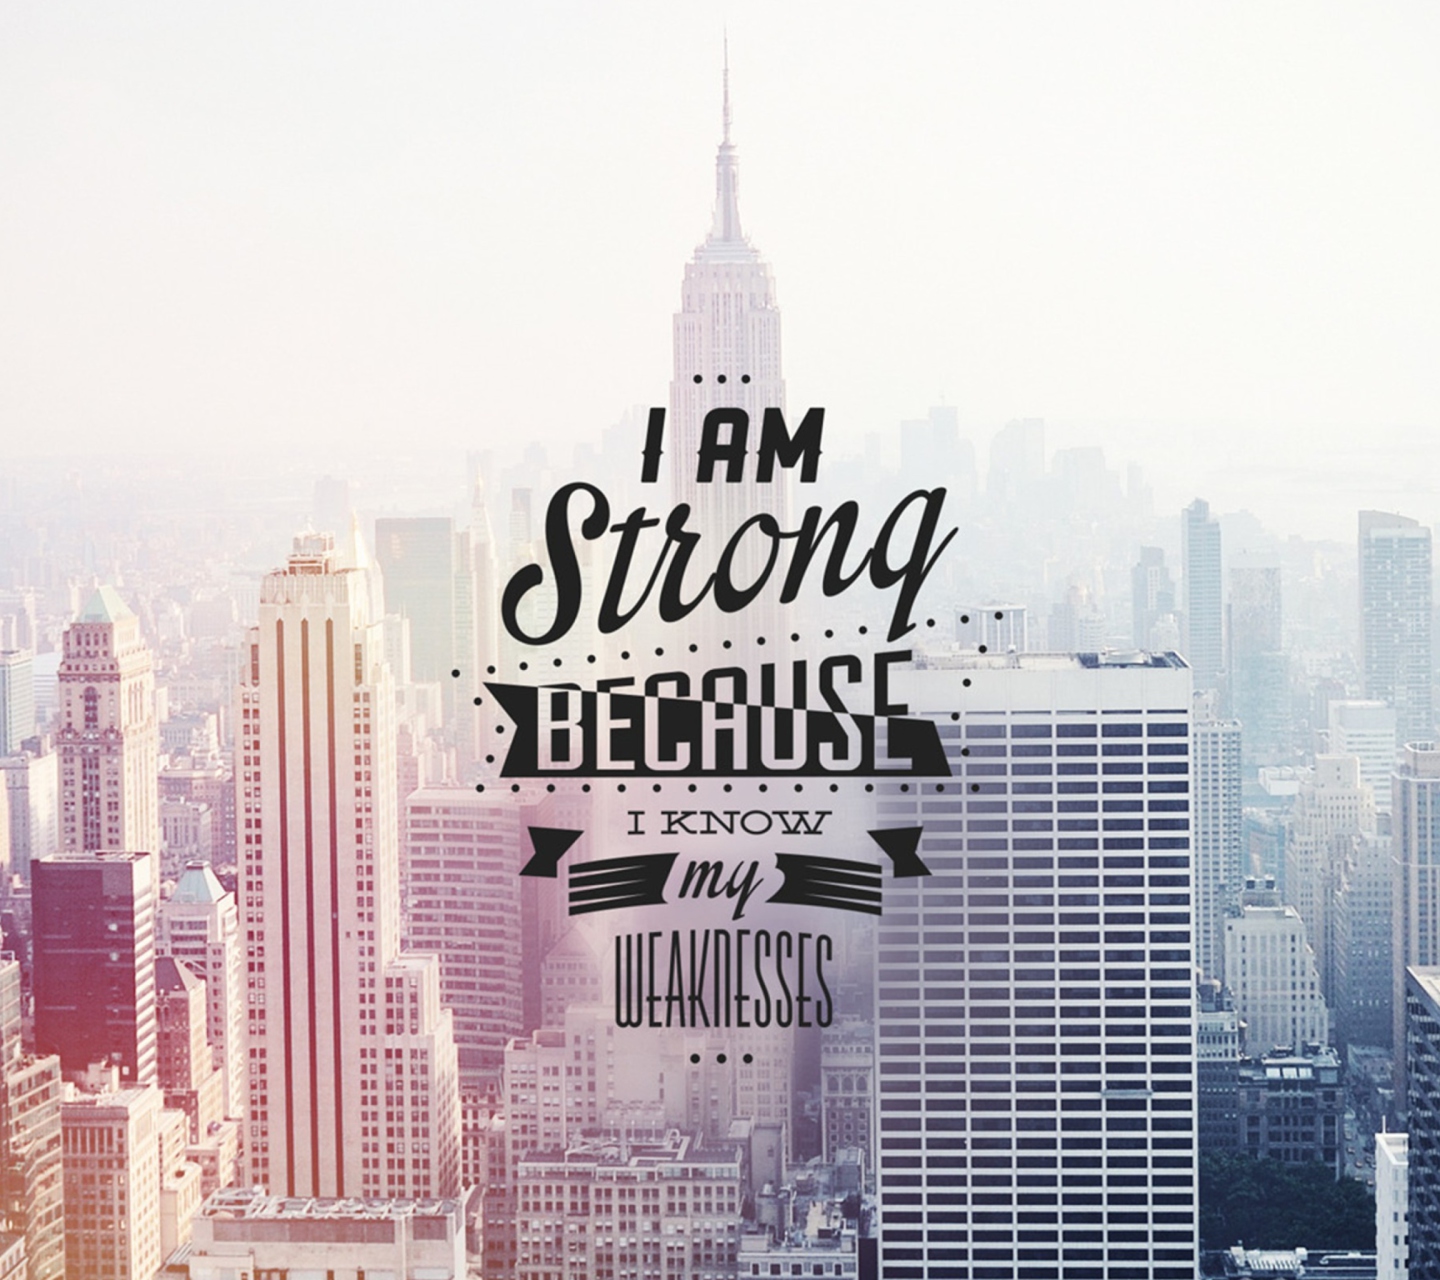 Sfondi I am strong because i know my weakness 1440x1280